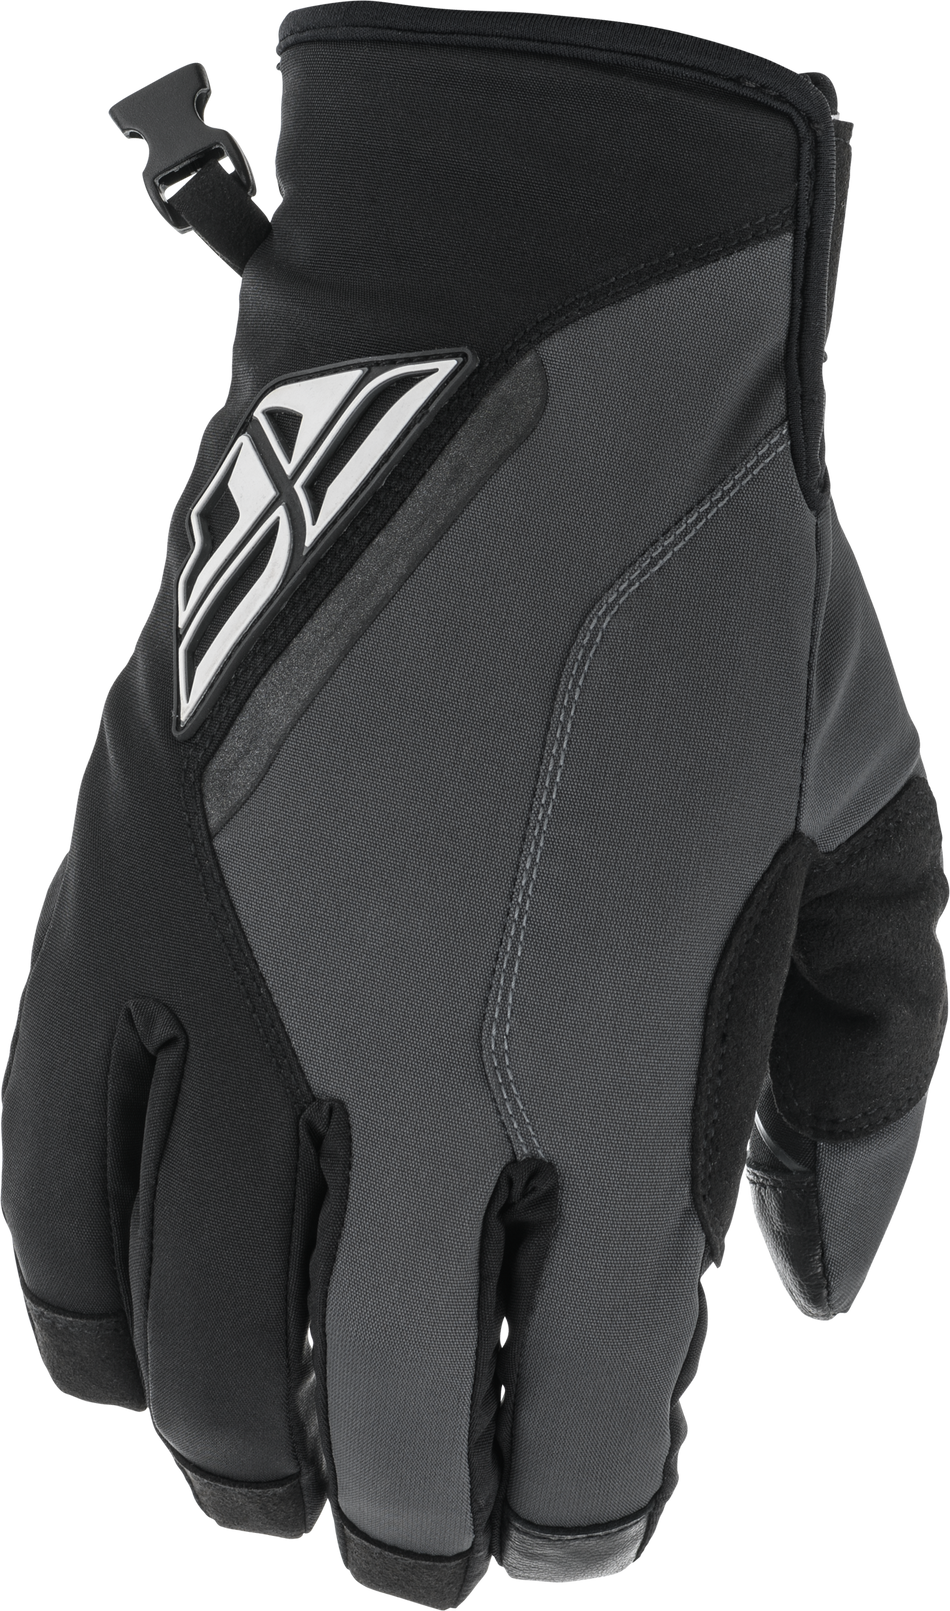 FLY RACING Youth Title Gloves Black/Grey Sz 06 371-05106